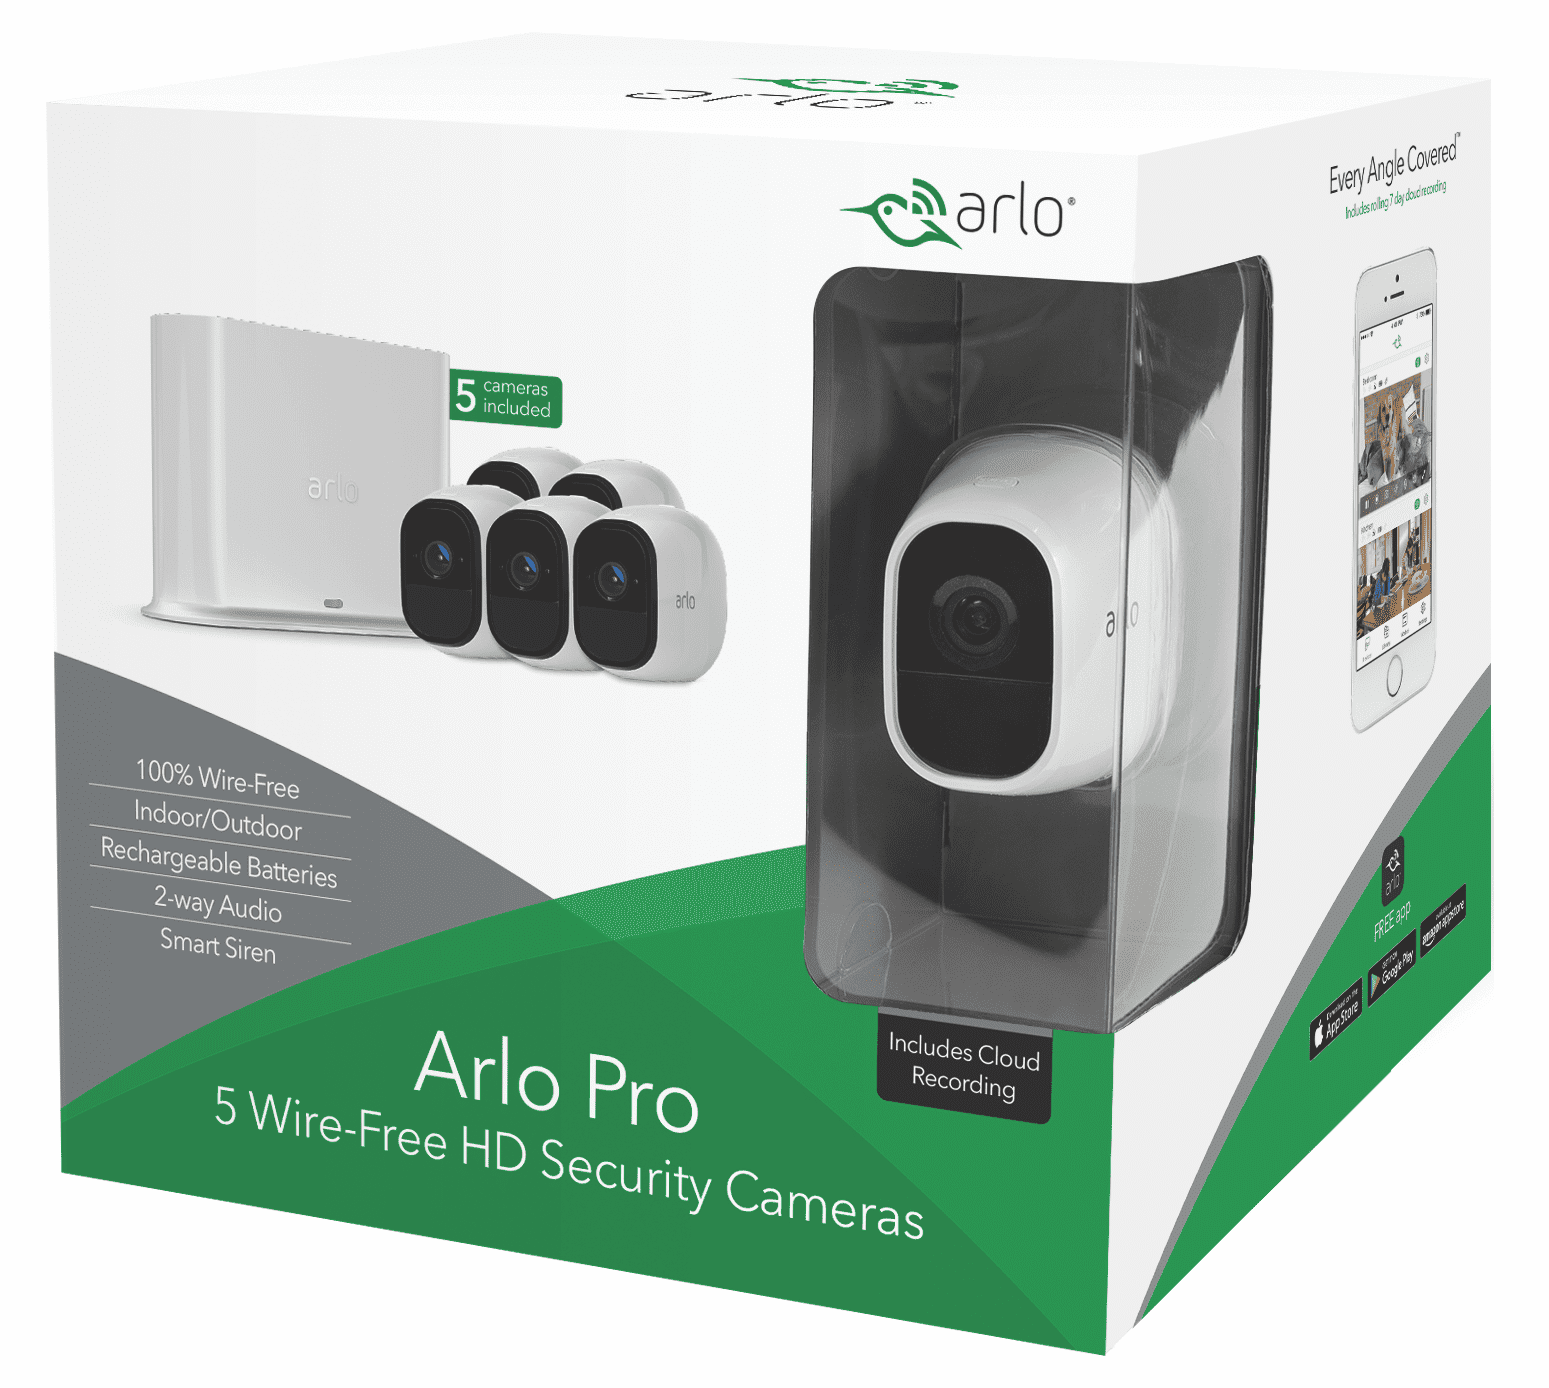 Arlo Pro 720P HD Security Camera System VMS4530 5 WireFree Rechargeable Cameras with TwoWay